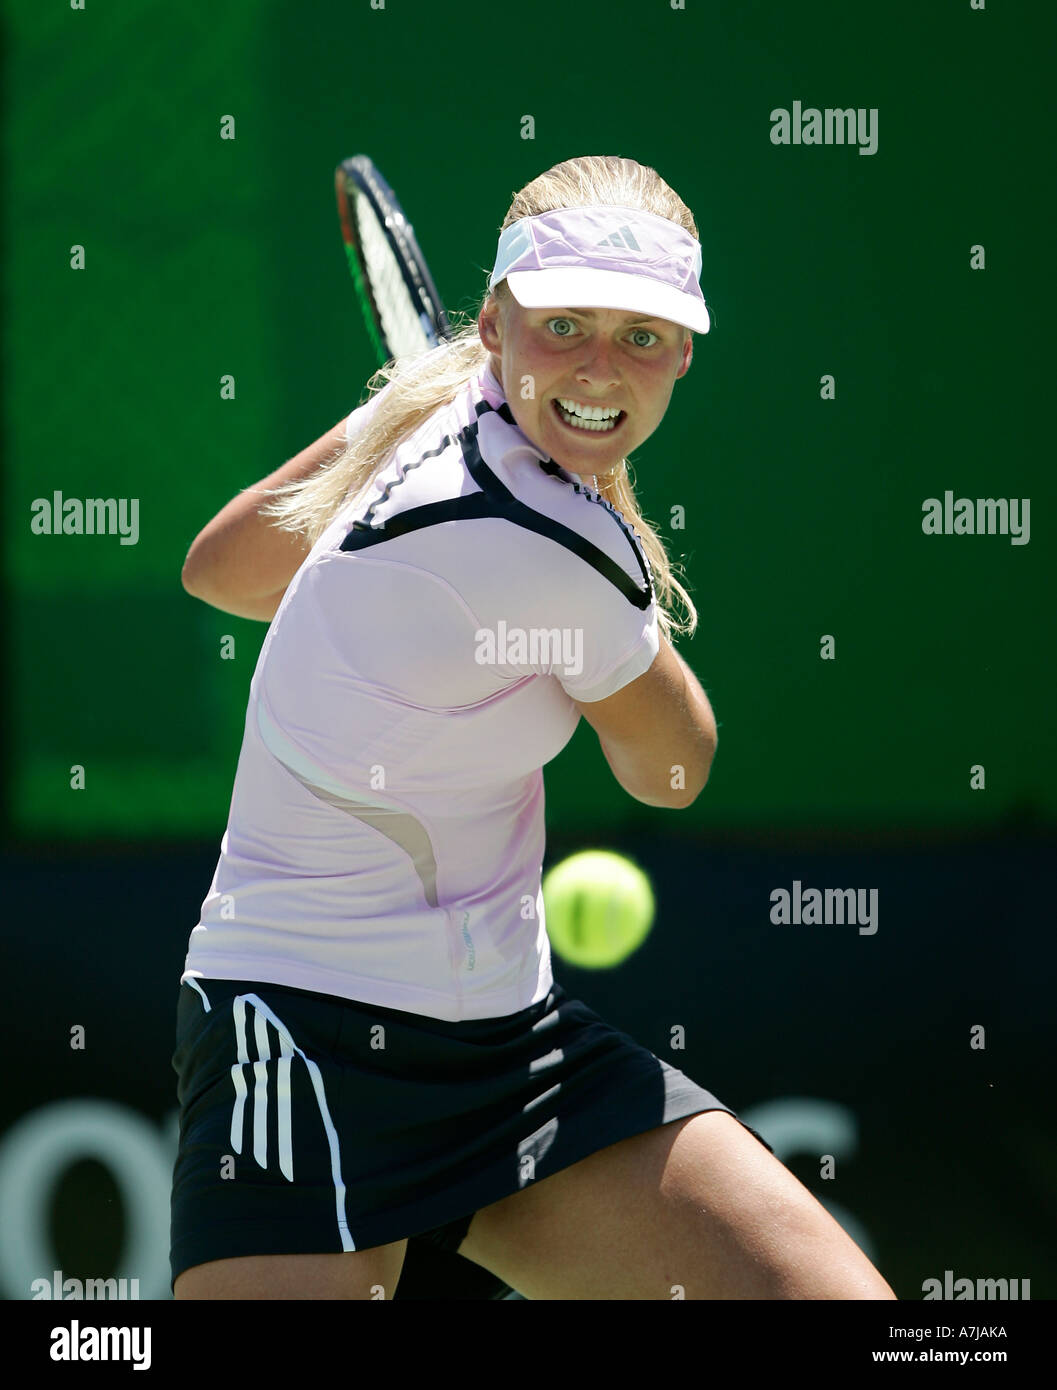 Anna Lena Groenefeld from Germany at the Australian Open in Melbourne / Australia. Stock Photo